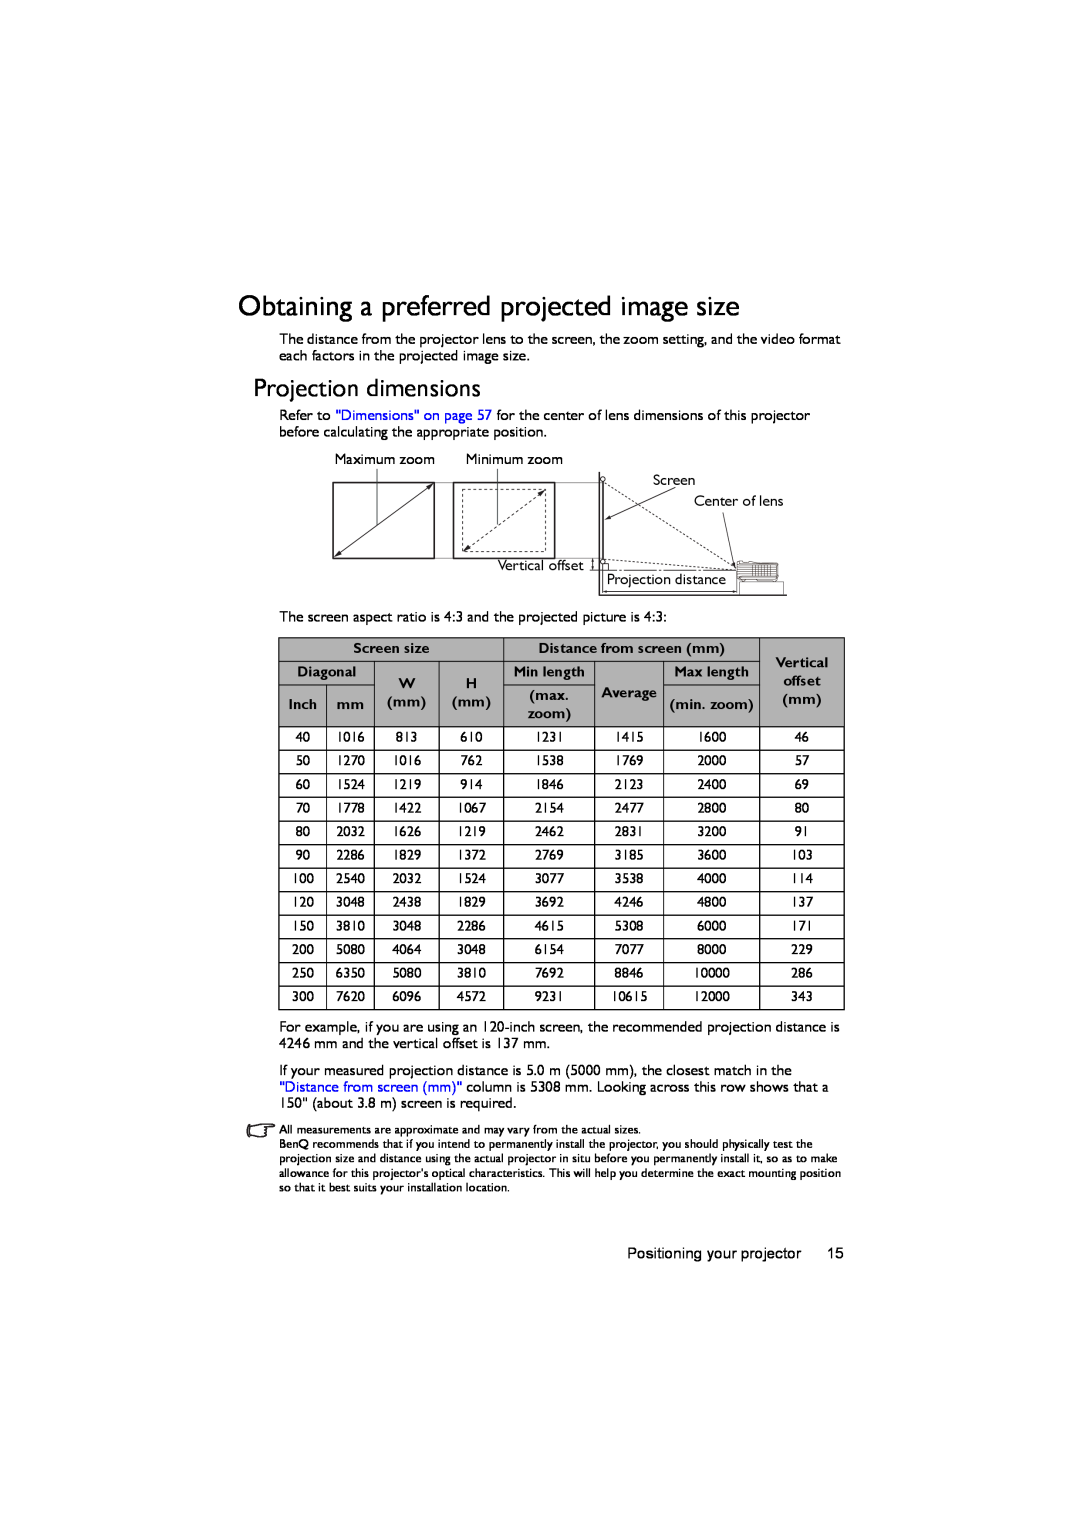 BenQ MX722 user manual Obtaining a preferred projected image size, Projection dimensions 